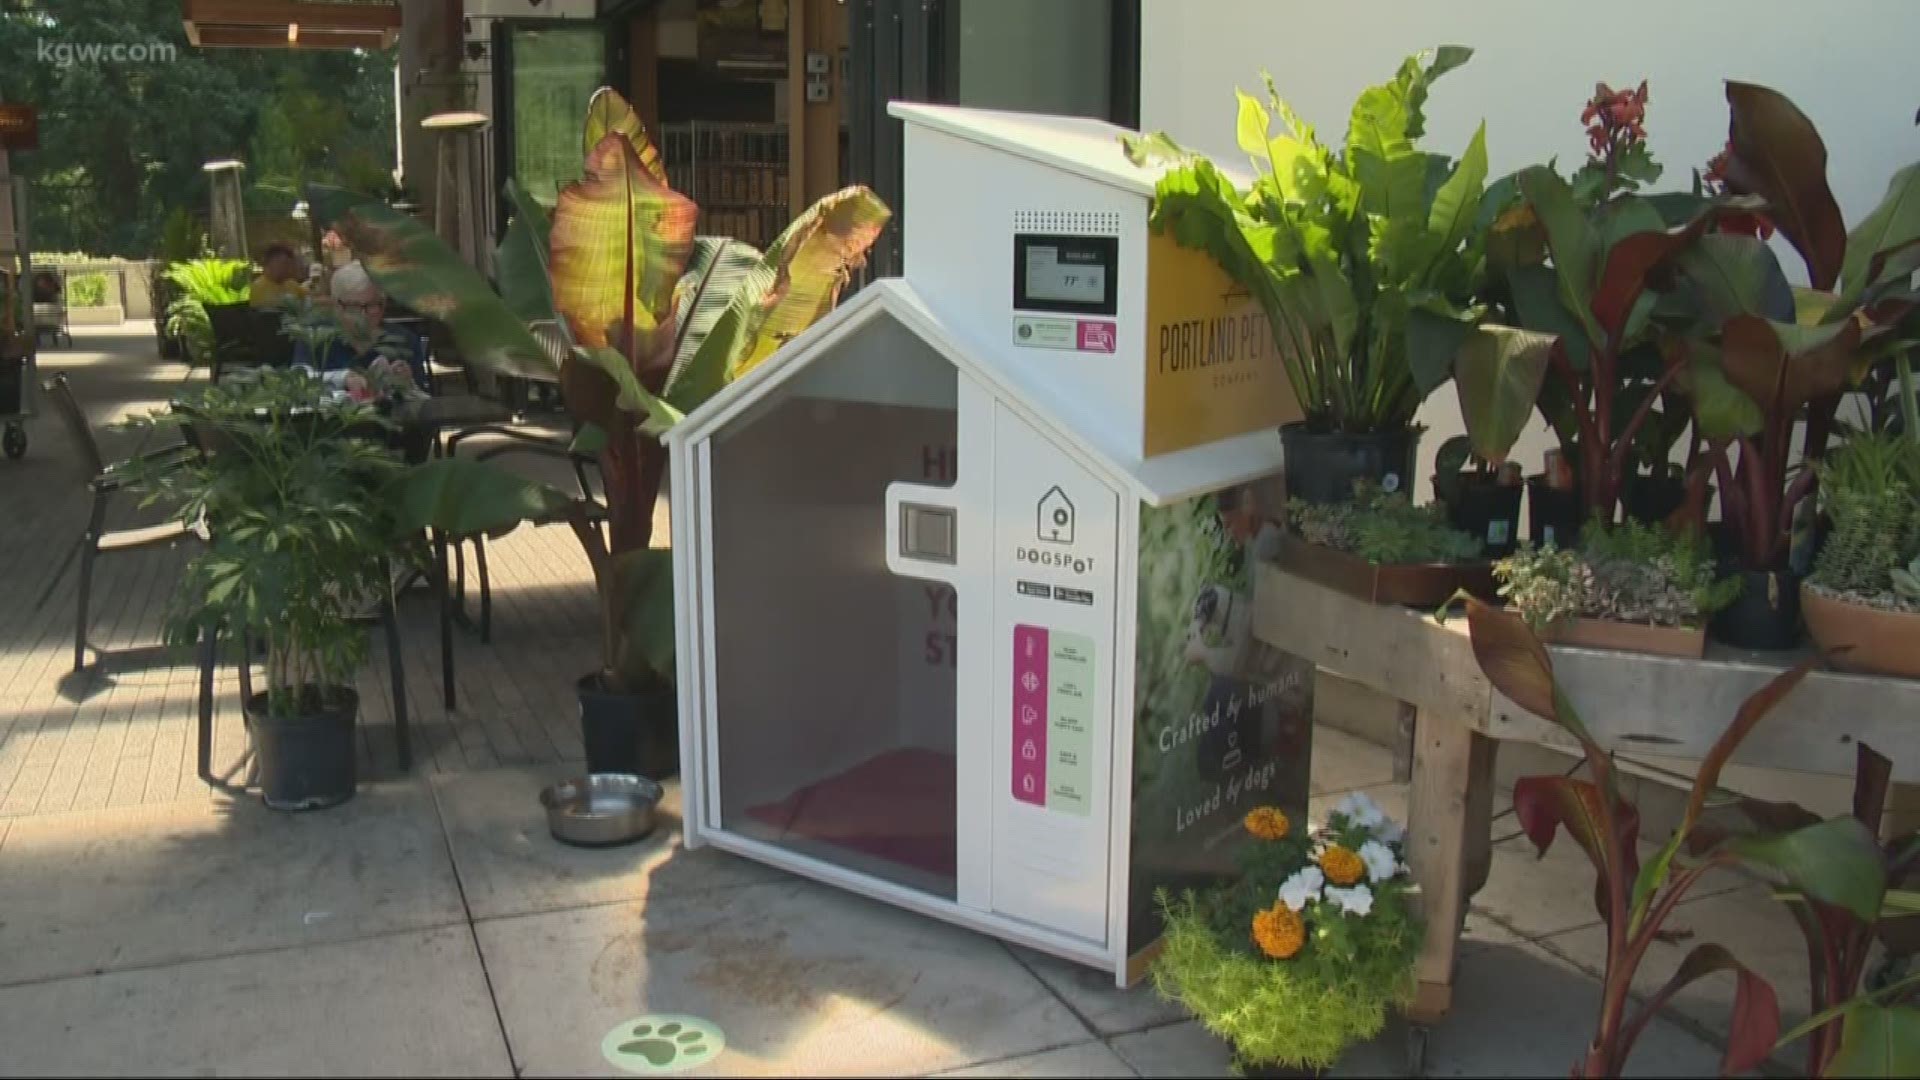 You can keep your dog safe outside a Zupan’s in one of their high-tech dog houses.